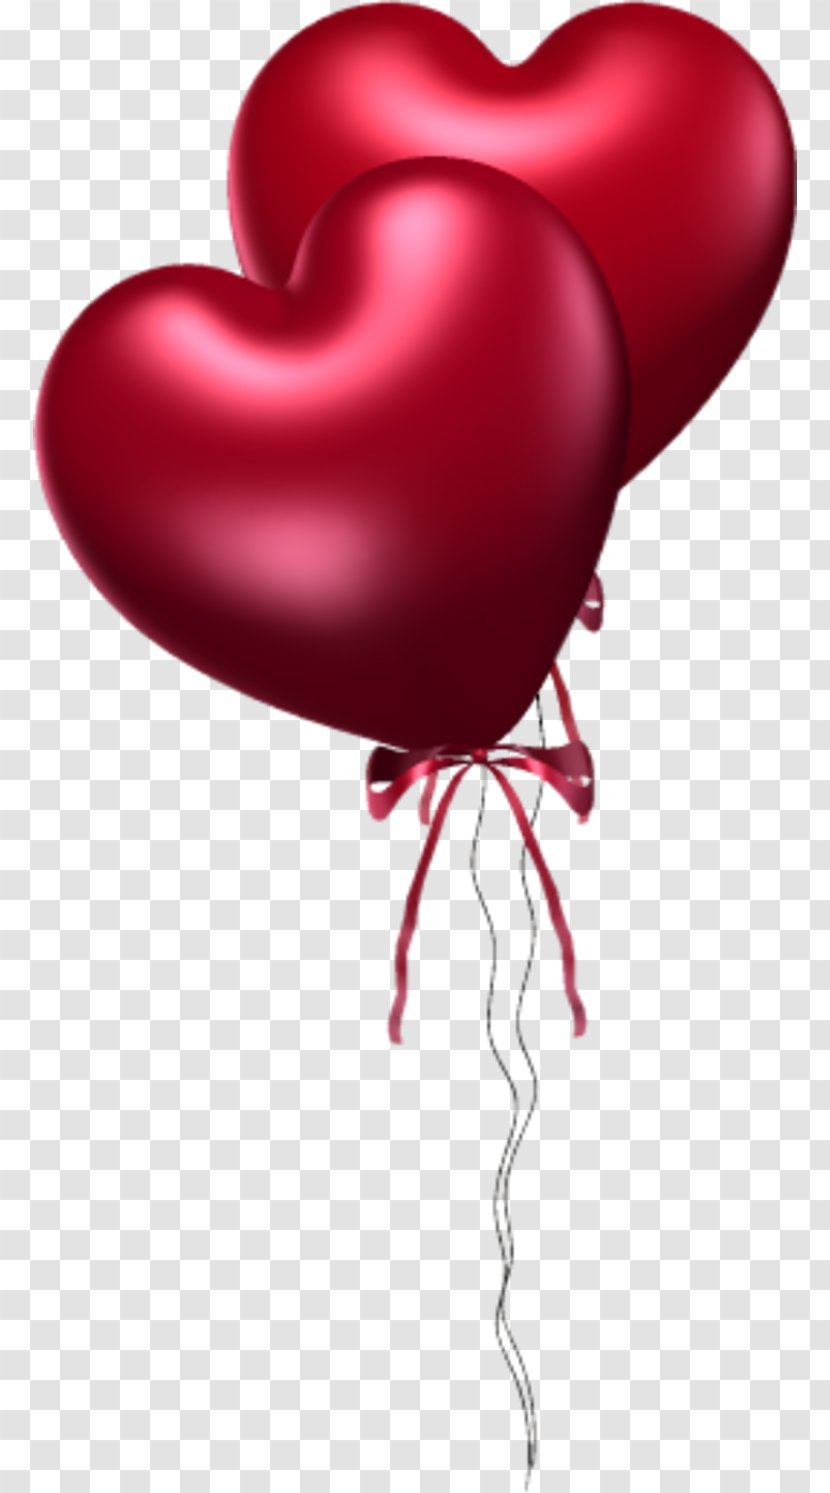 YouTube Love - Frame - Balloon Transparent PNG